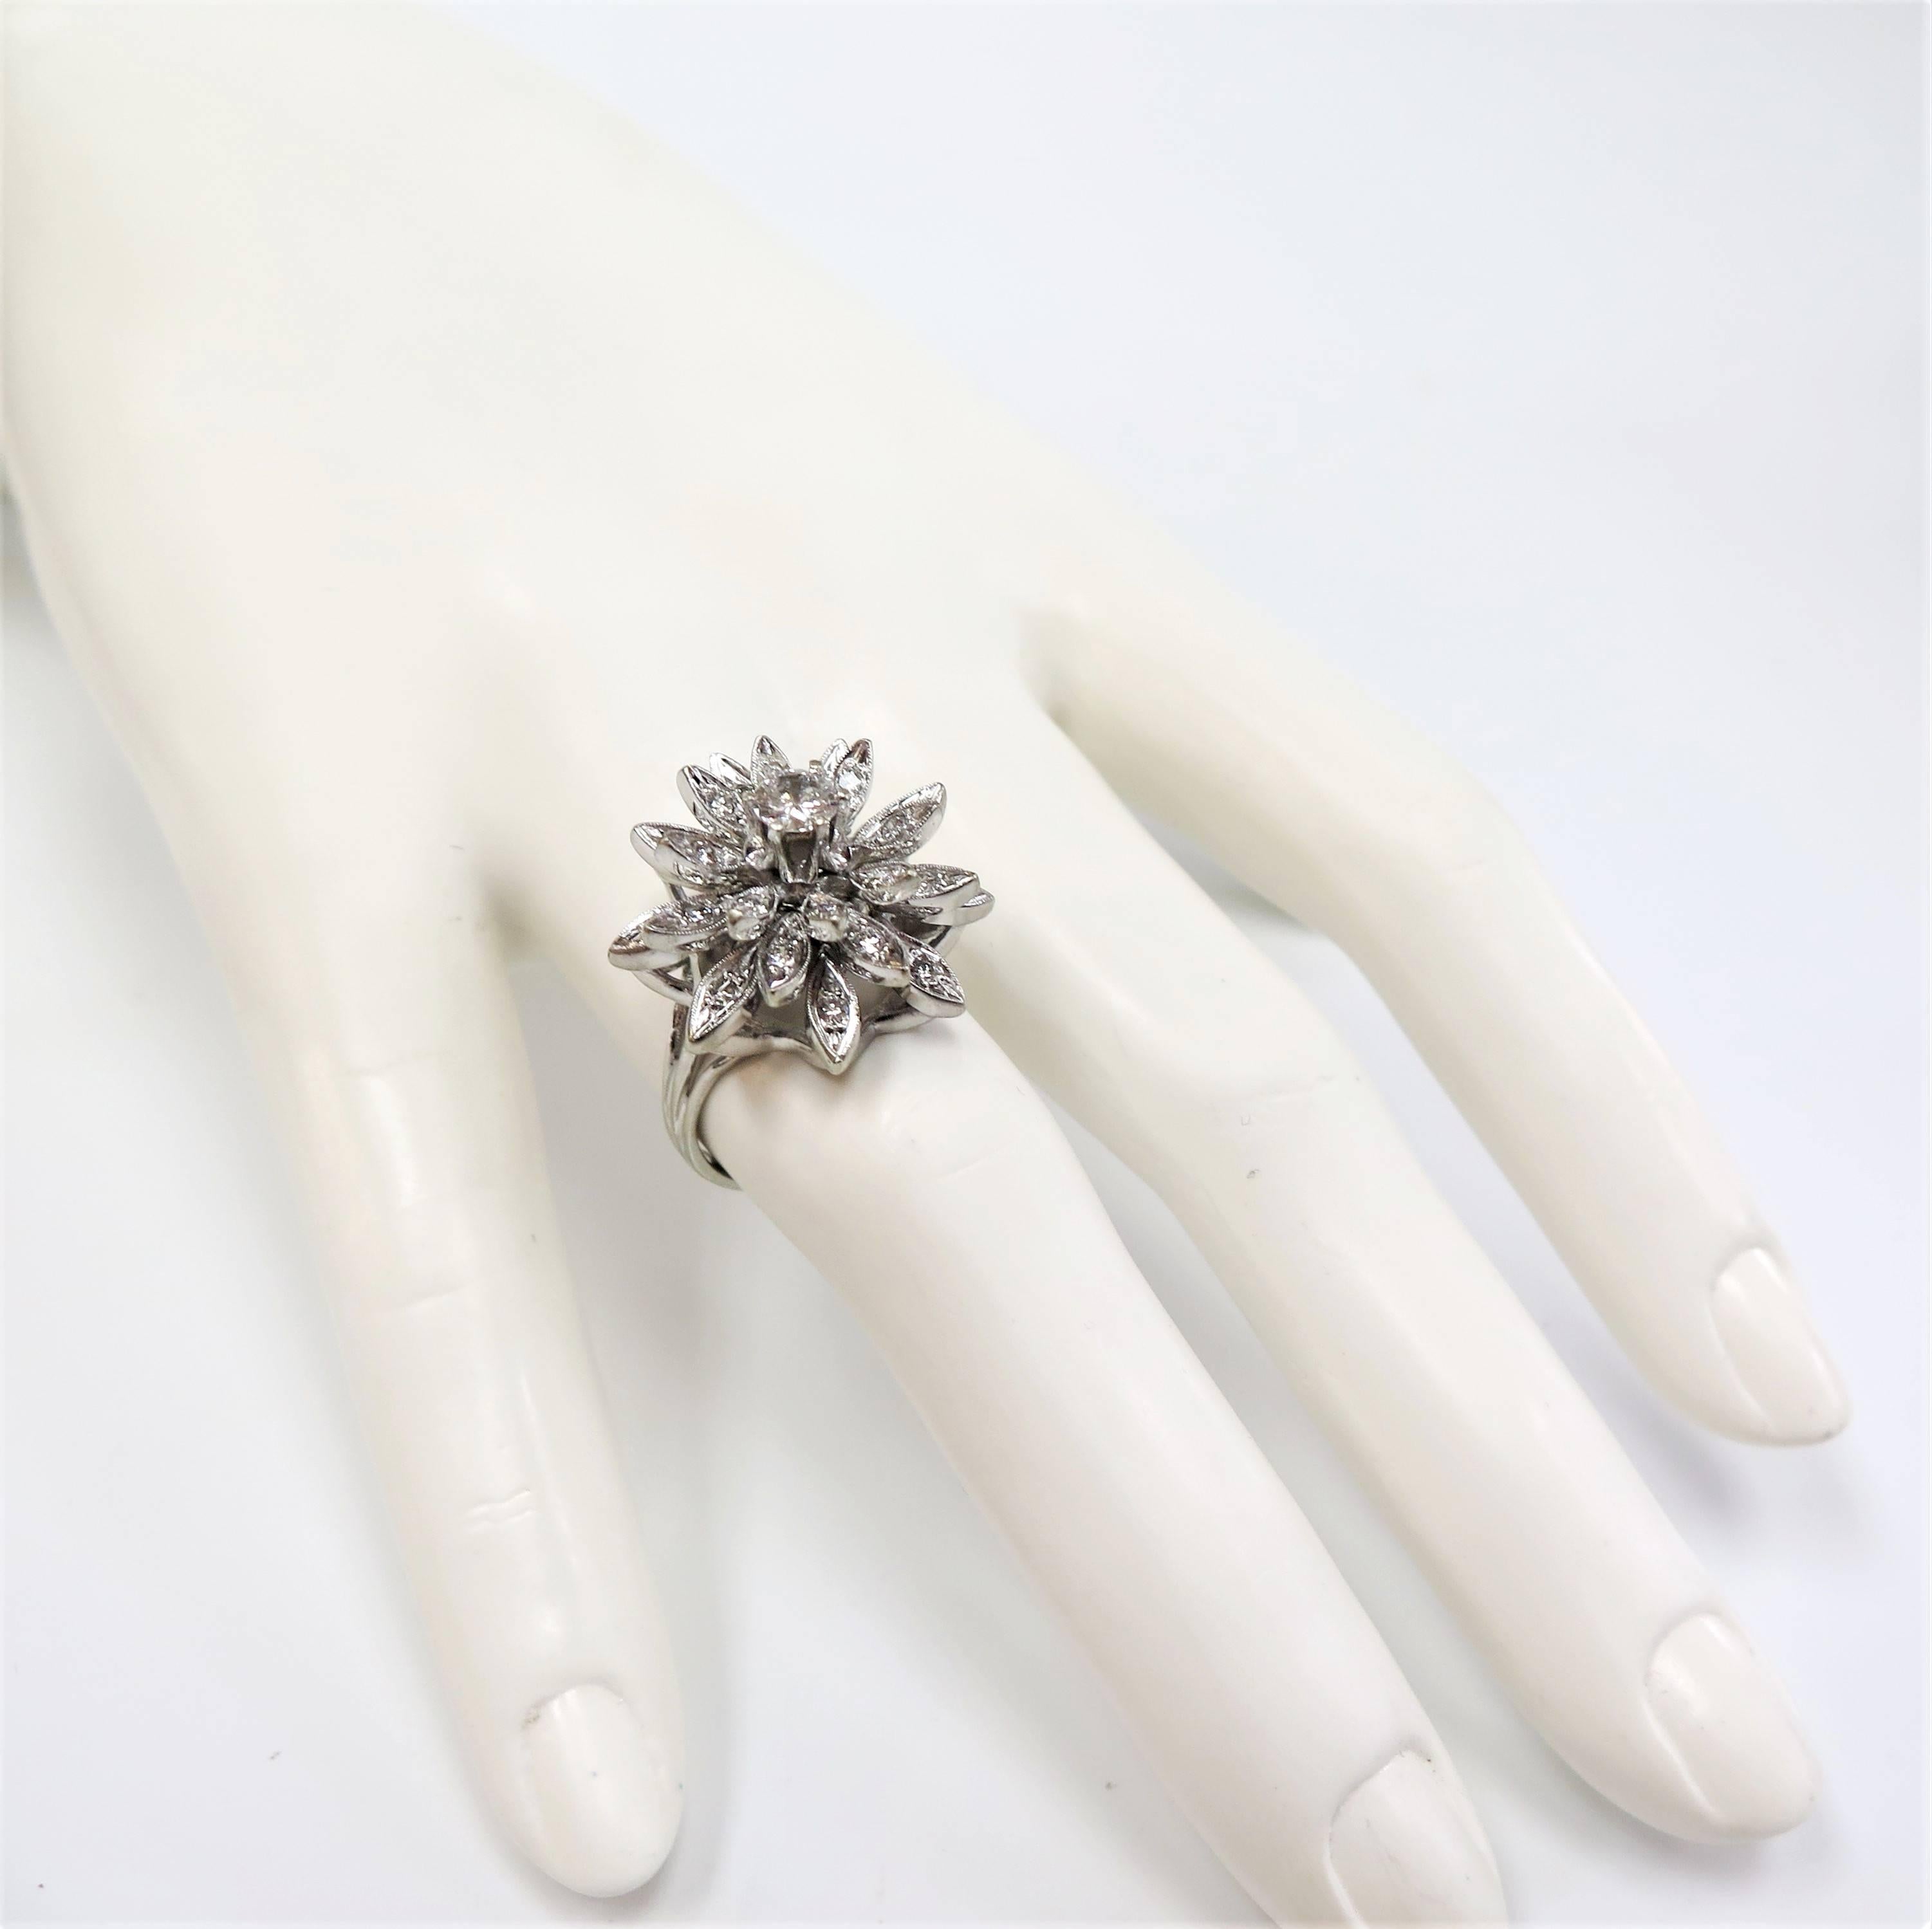 Women's 1950s Domed Diamond Cluster Flower Ring or Total Diamond Weight 0.86 Carat